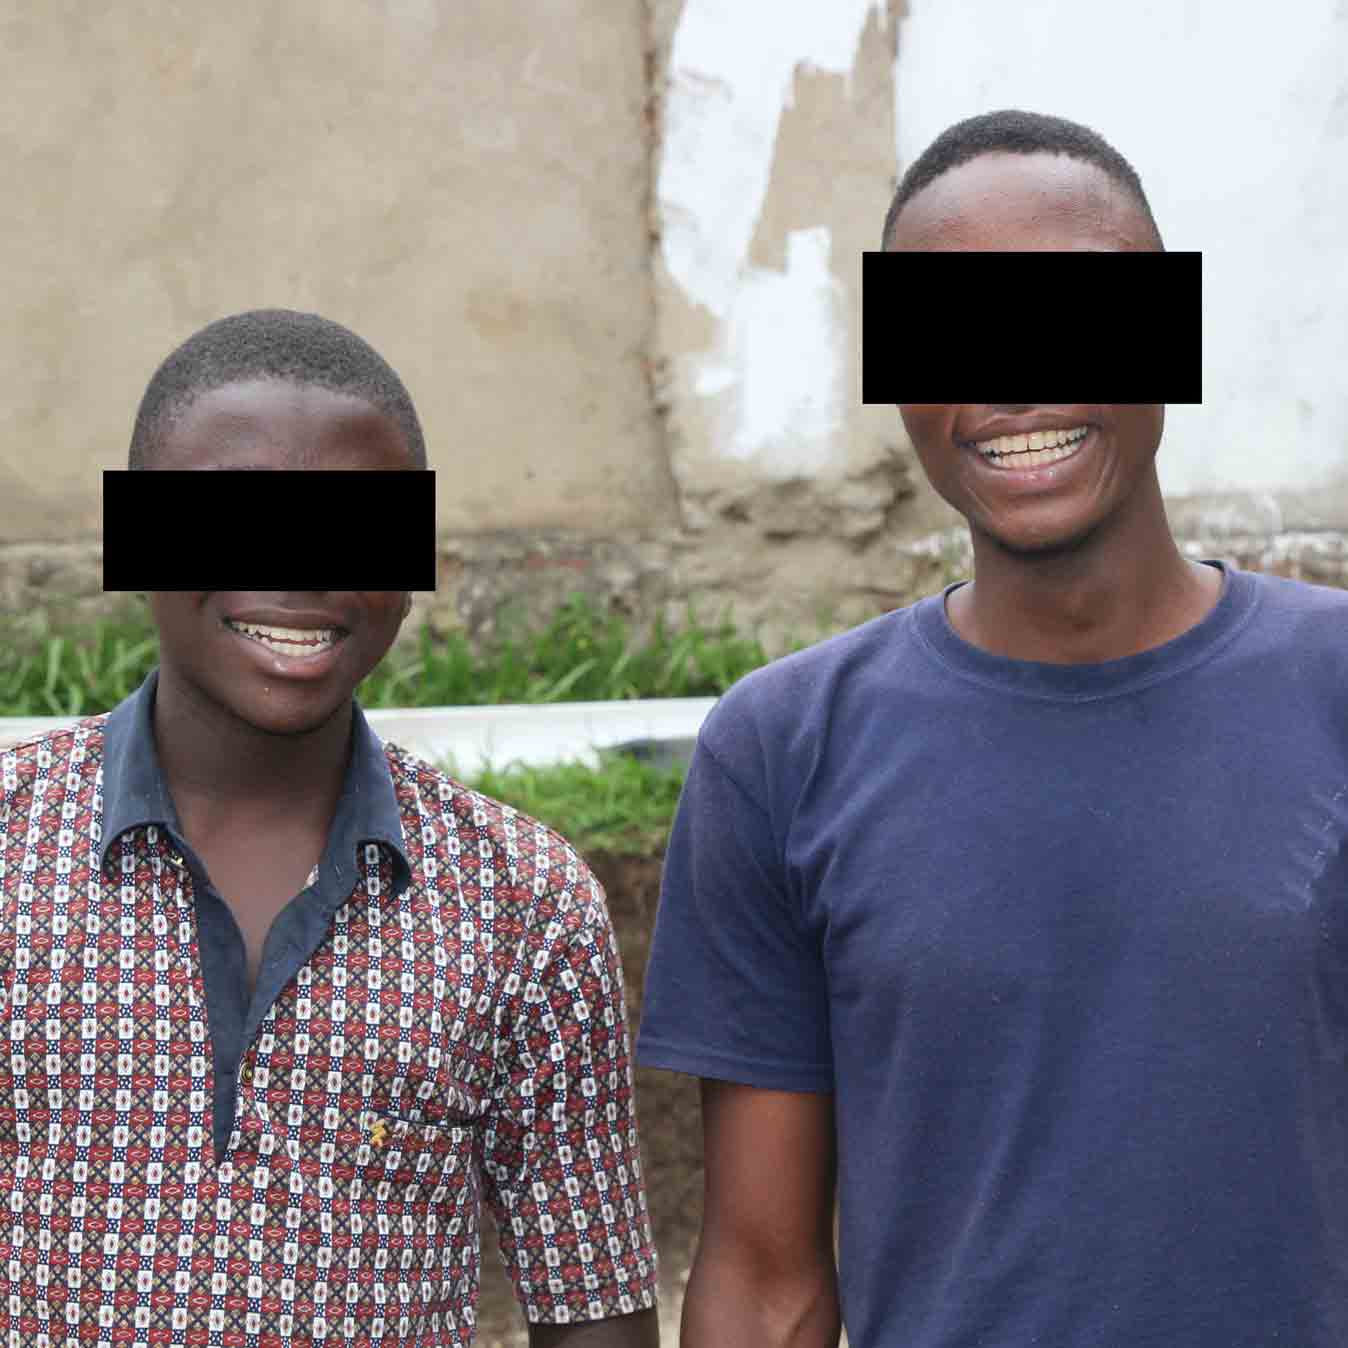 UGANDA | SEP. 02, 2020 — Two Muslim Friends Become Brothers in Christ